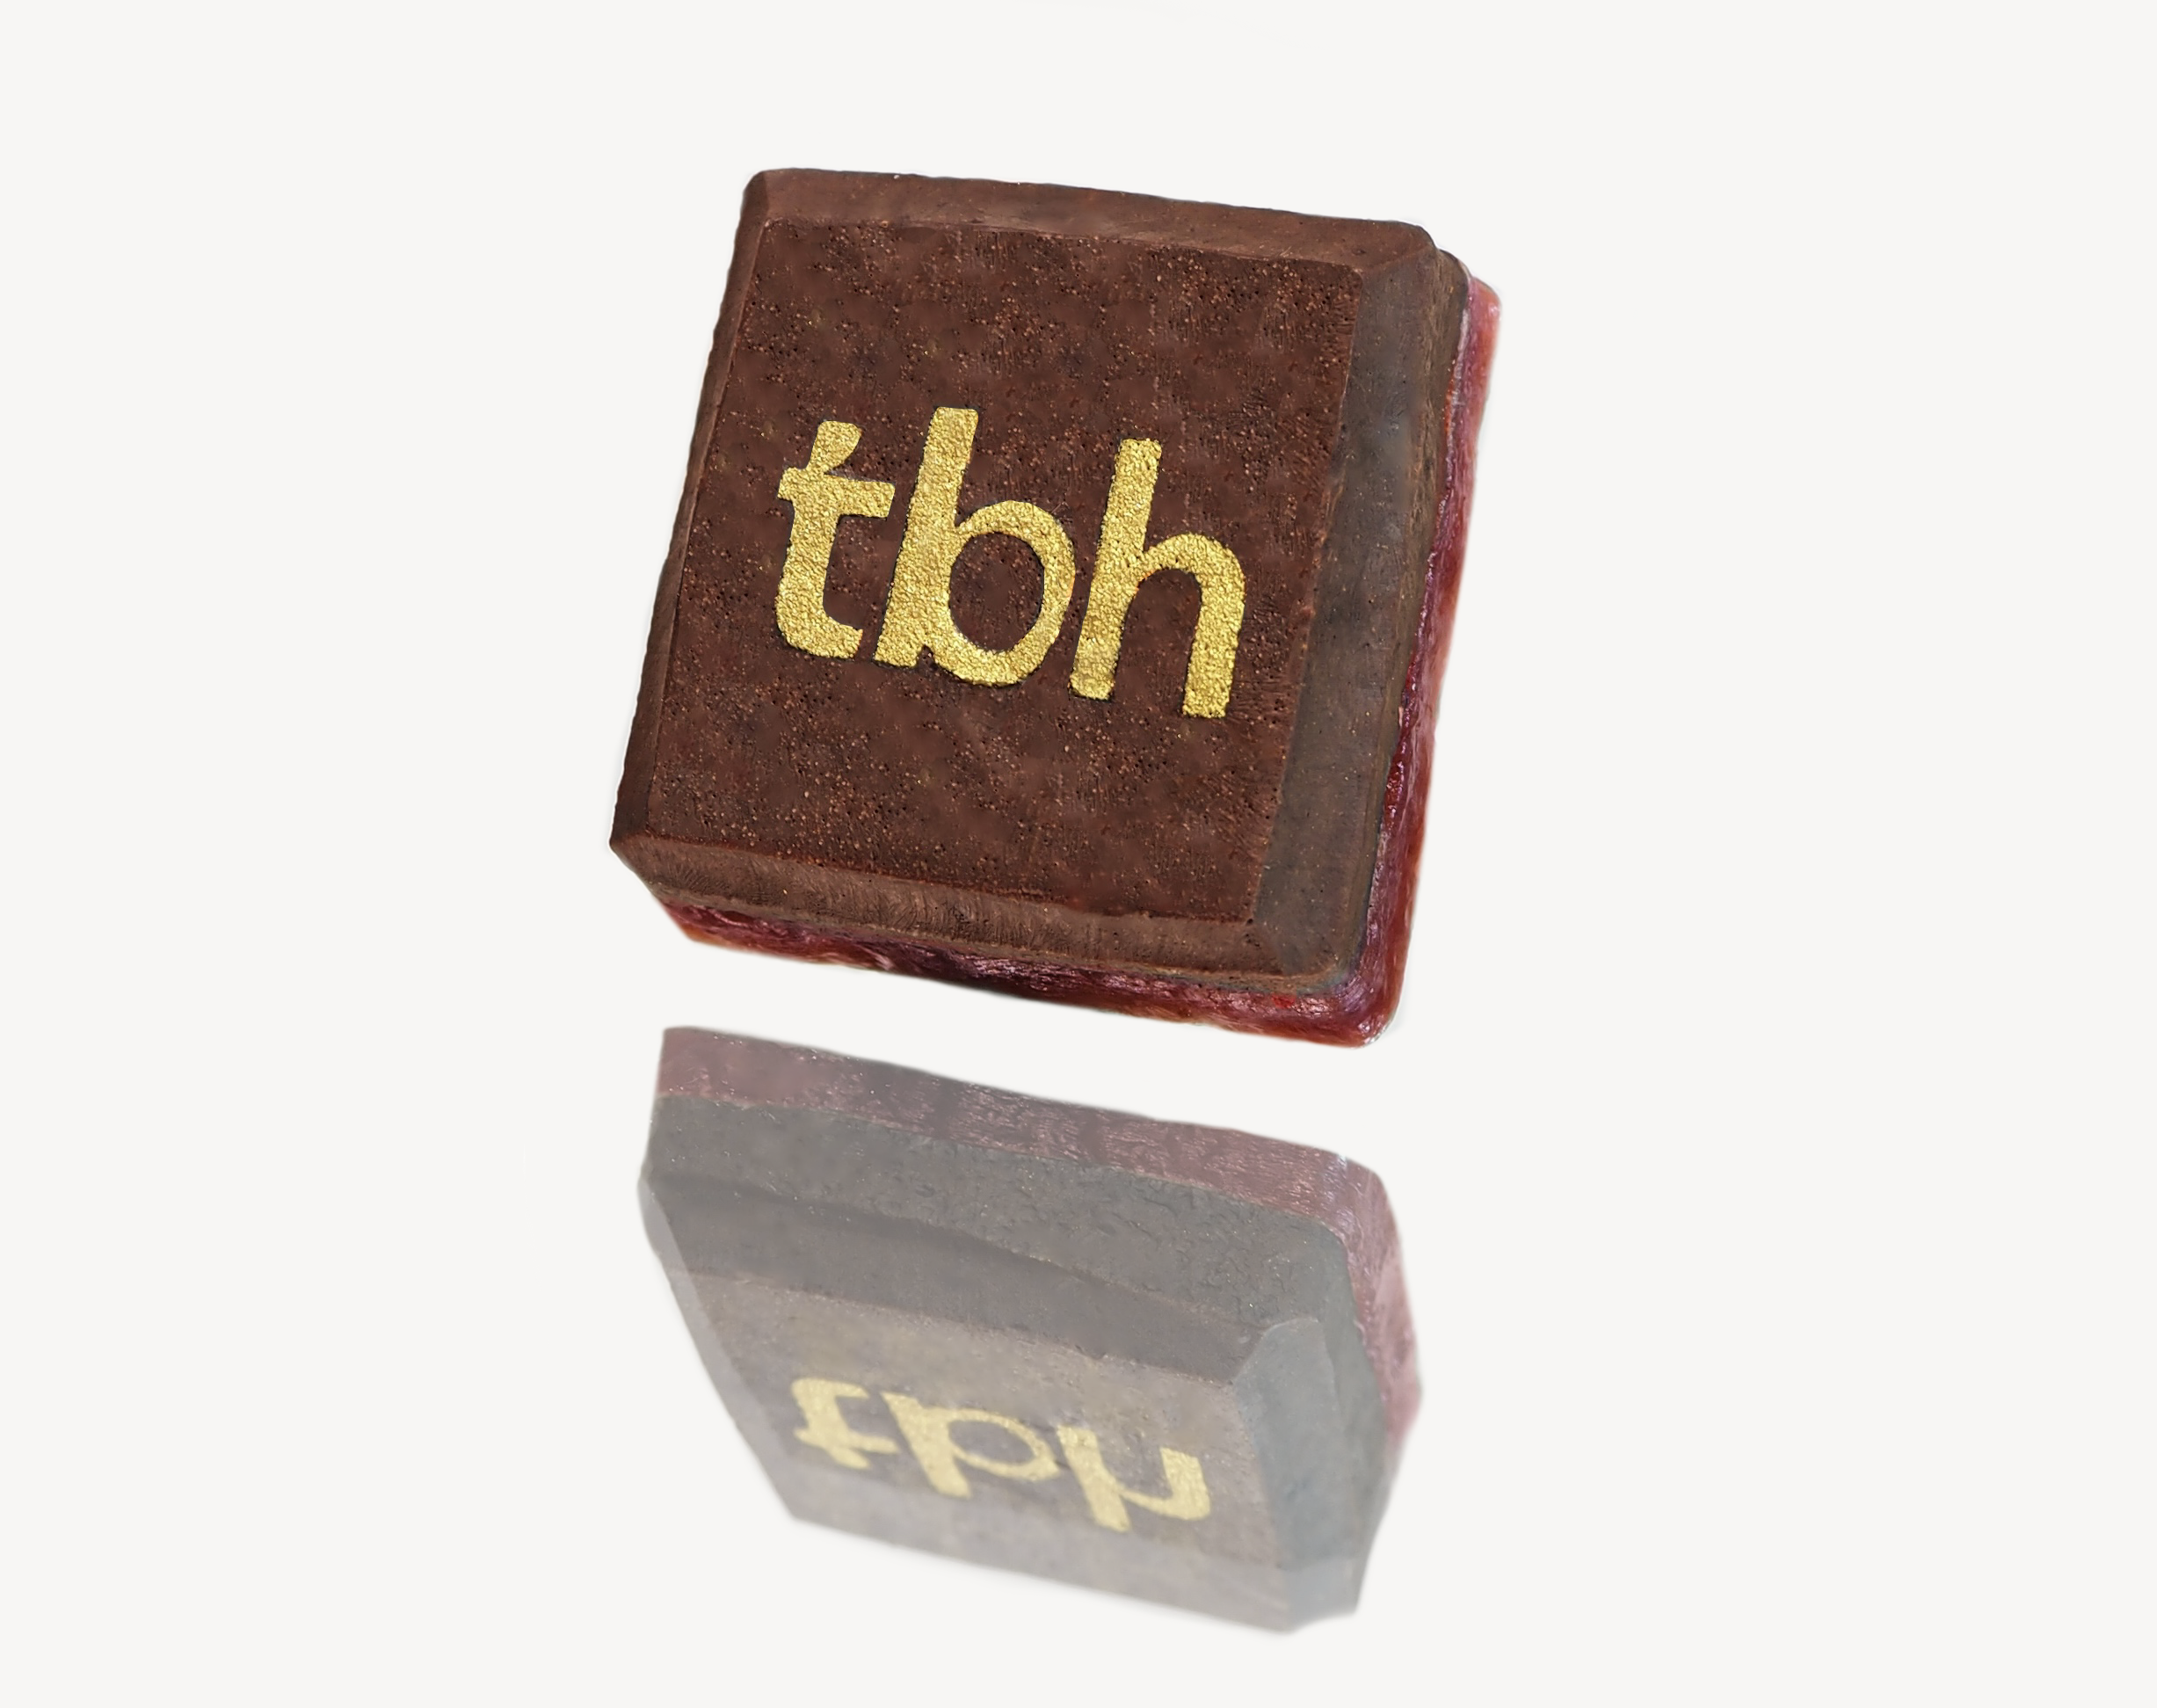 A square chocolate sweet with the letters 'tbh' in gold on top, placed on a reflective surface creating a clear mirror image below it.